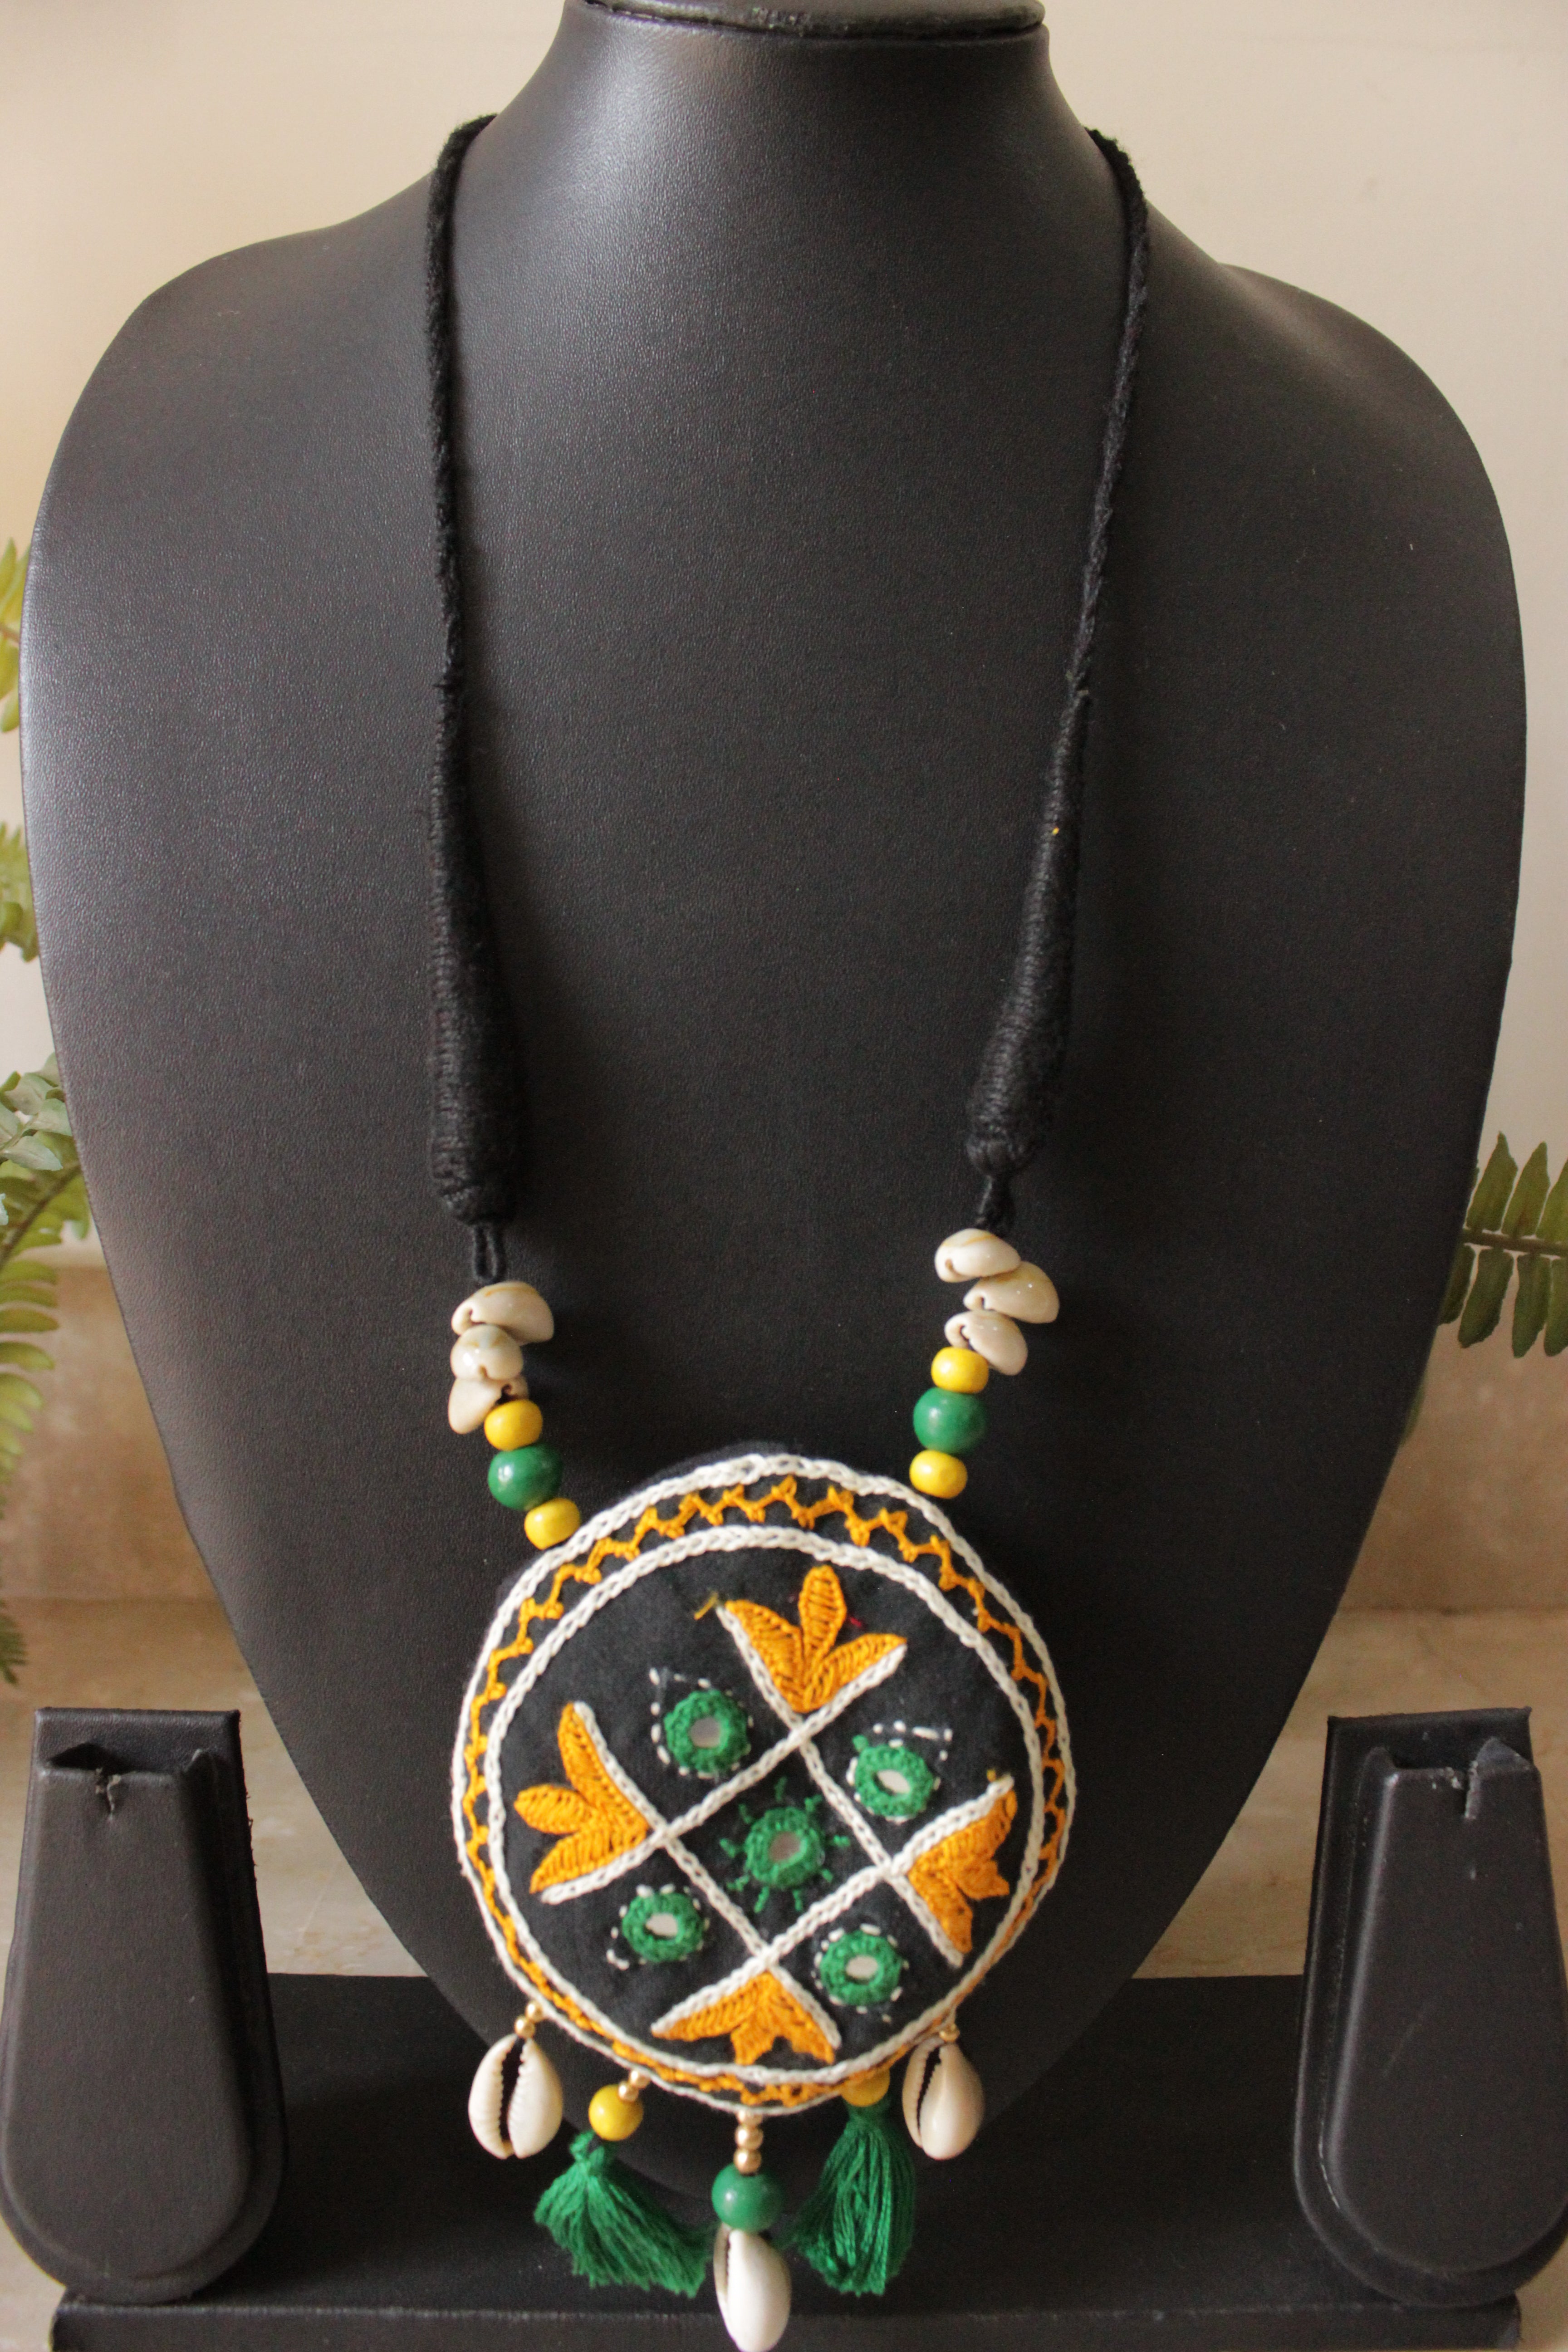 Black & Yellow Cross-Stitch Hand Embroidered Shell and Mirror Work Fabric Necklace